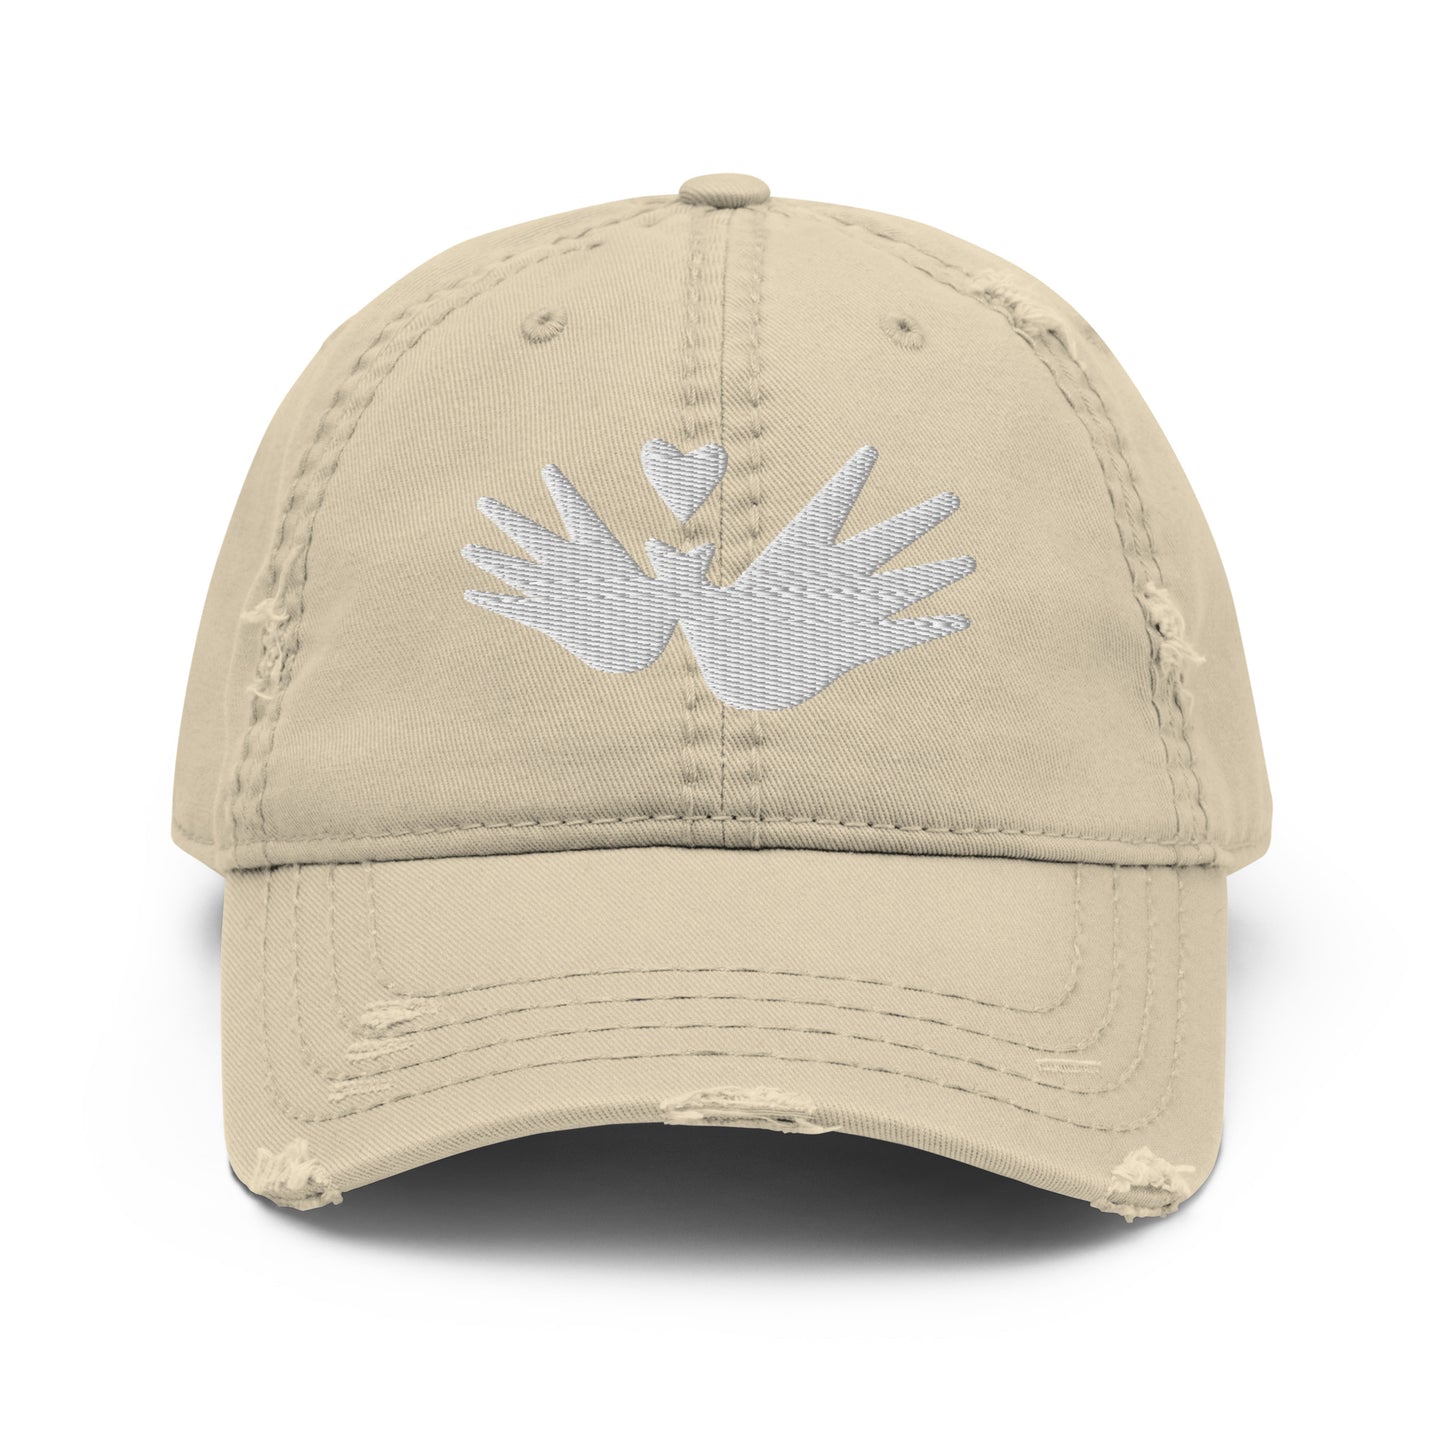 Williams Syndrome Association — Distressed Dad Hat